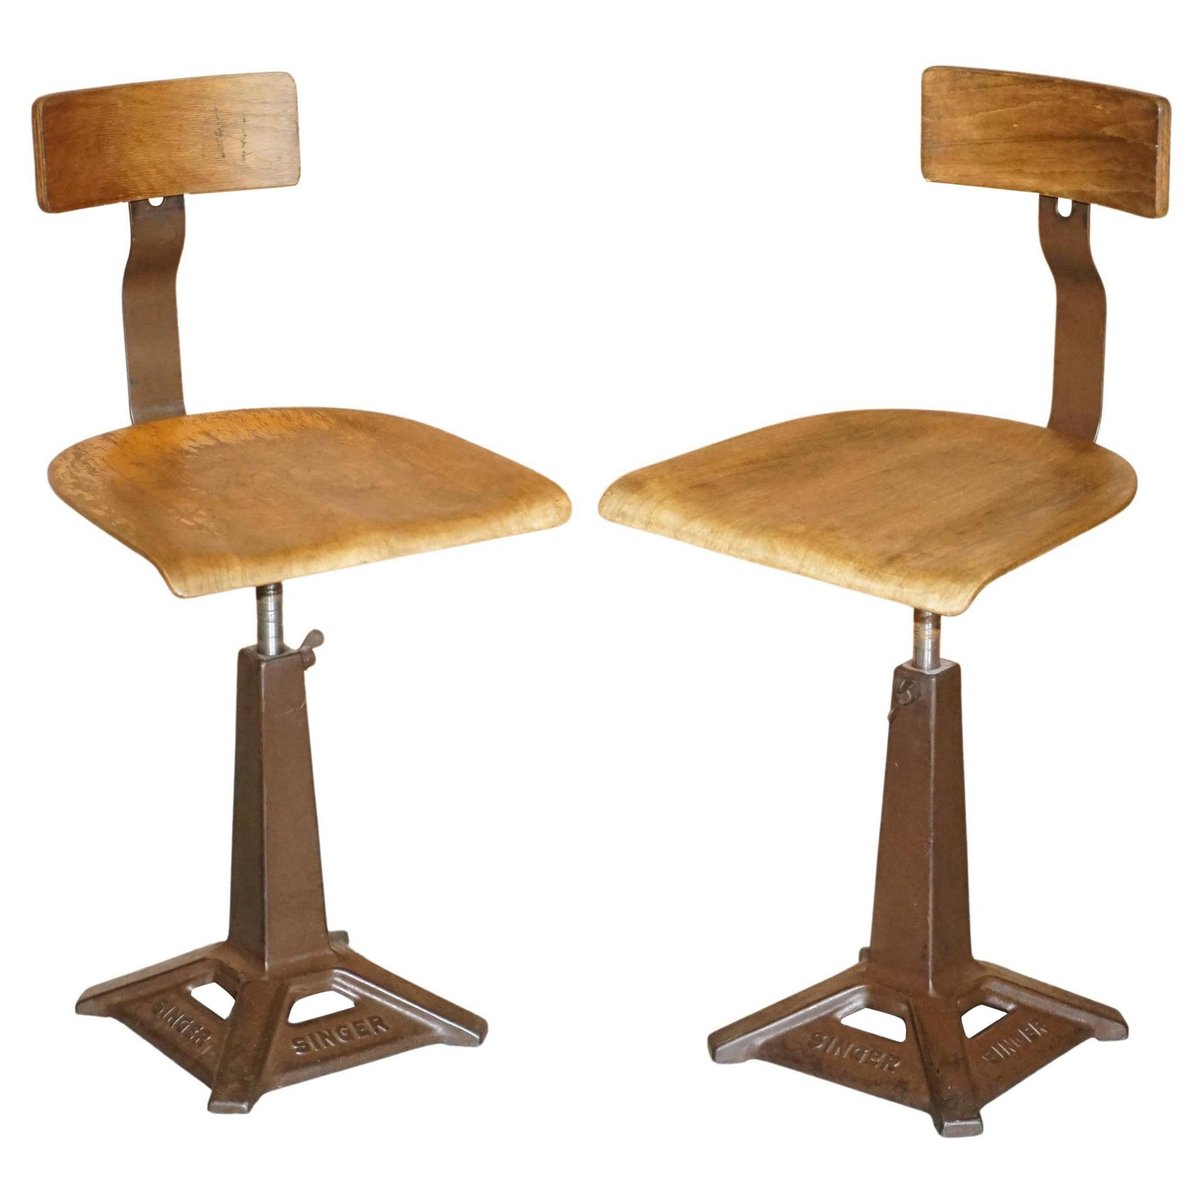 antique height adjustable bar stools set of 2 GZP-1027922